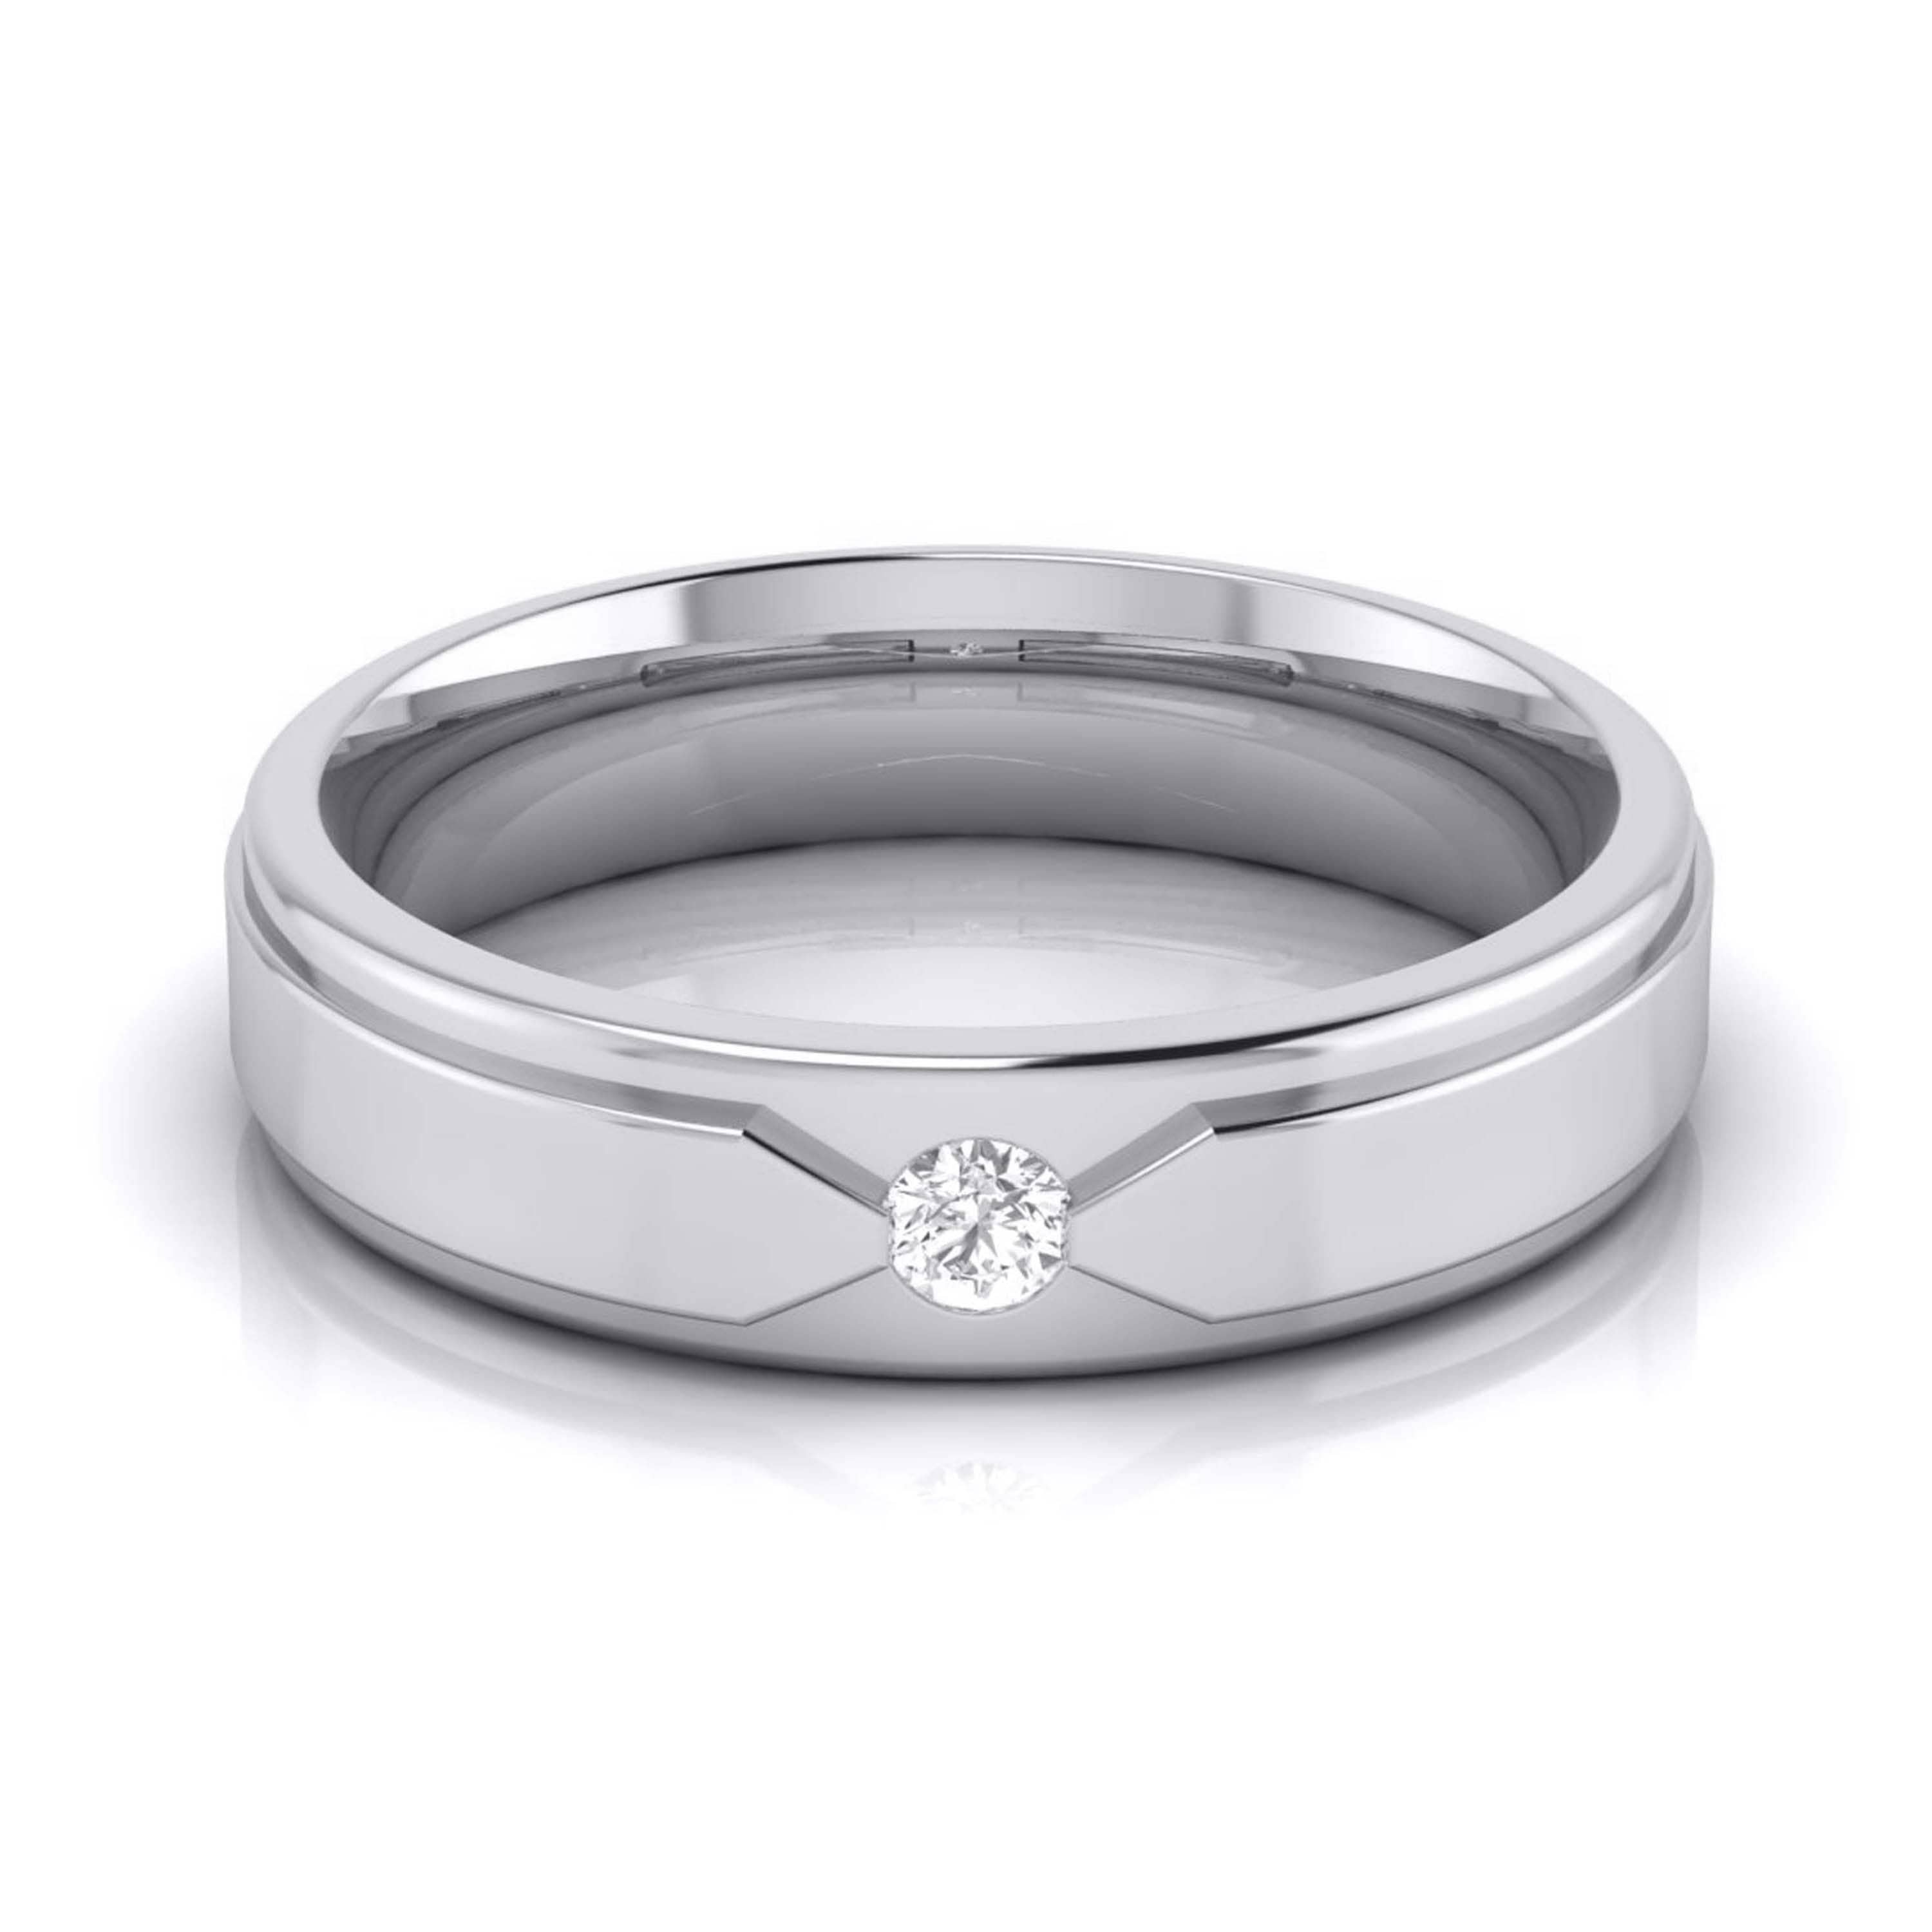 jewelove ready to ship ring sizes 12 15 16 17 18 19 20 21 22 23 24 platinum love bands with matte finish jl pt 529 women s band only si ij 37535418974449